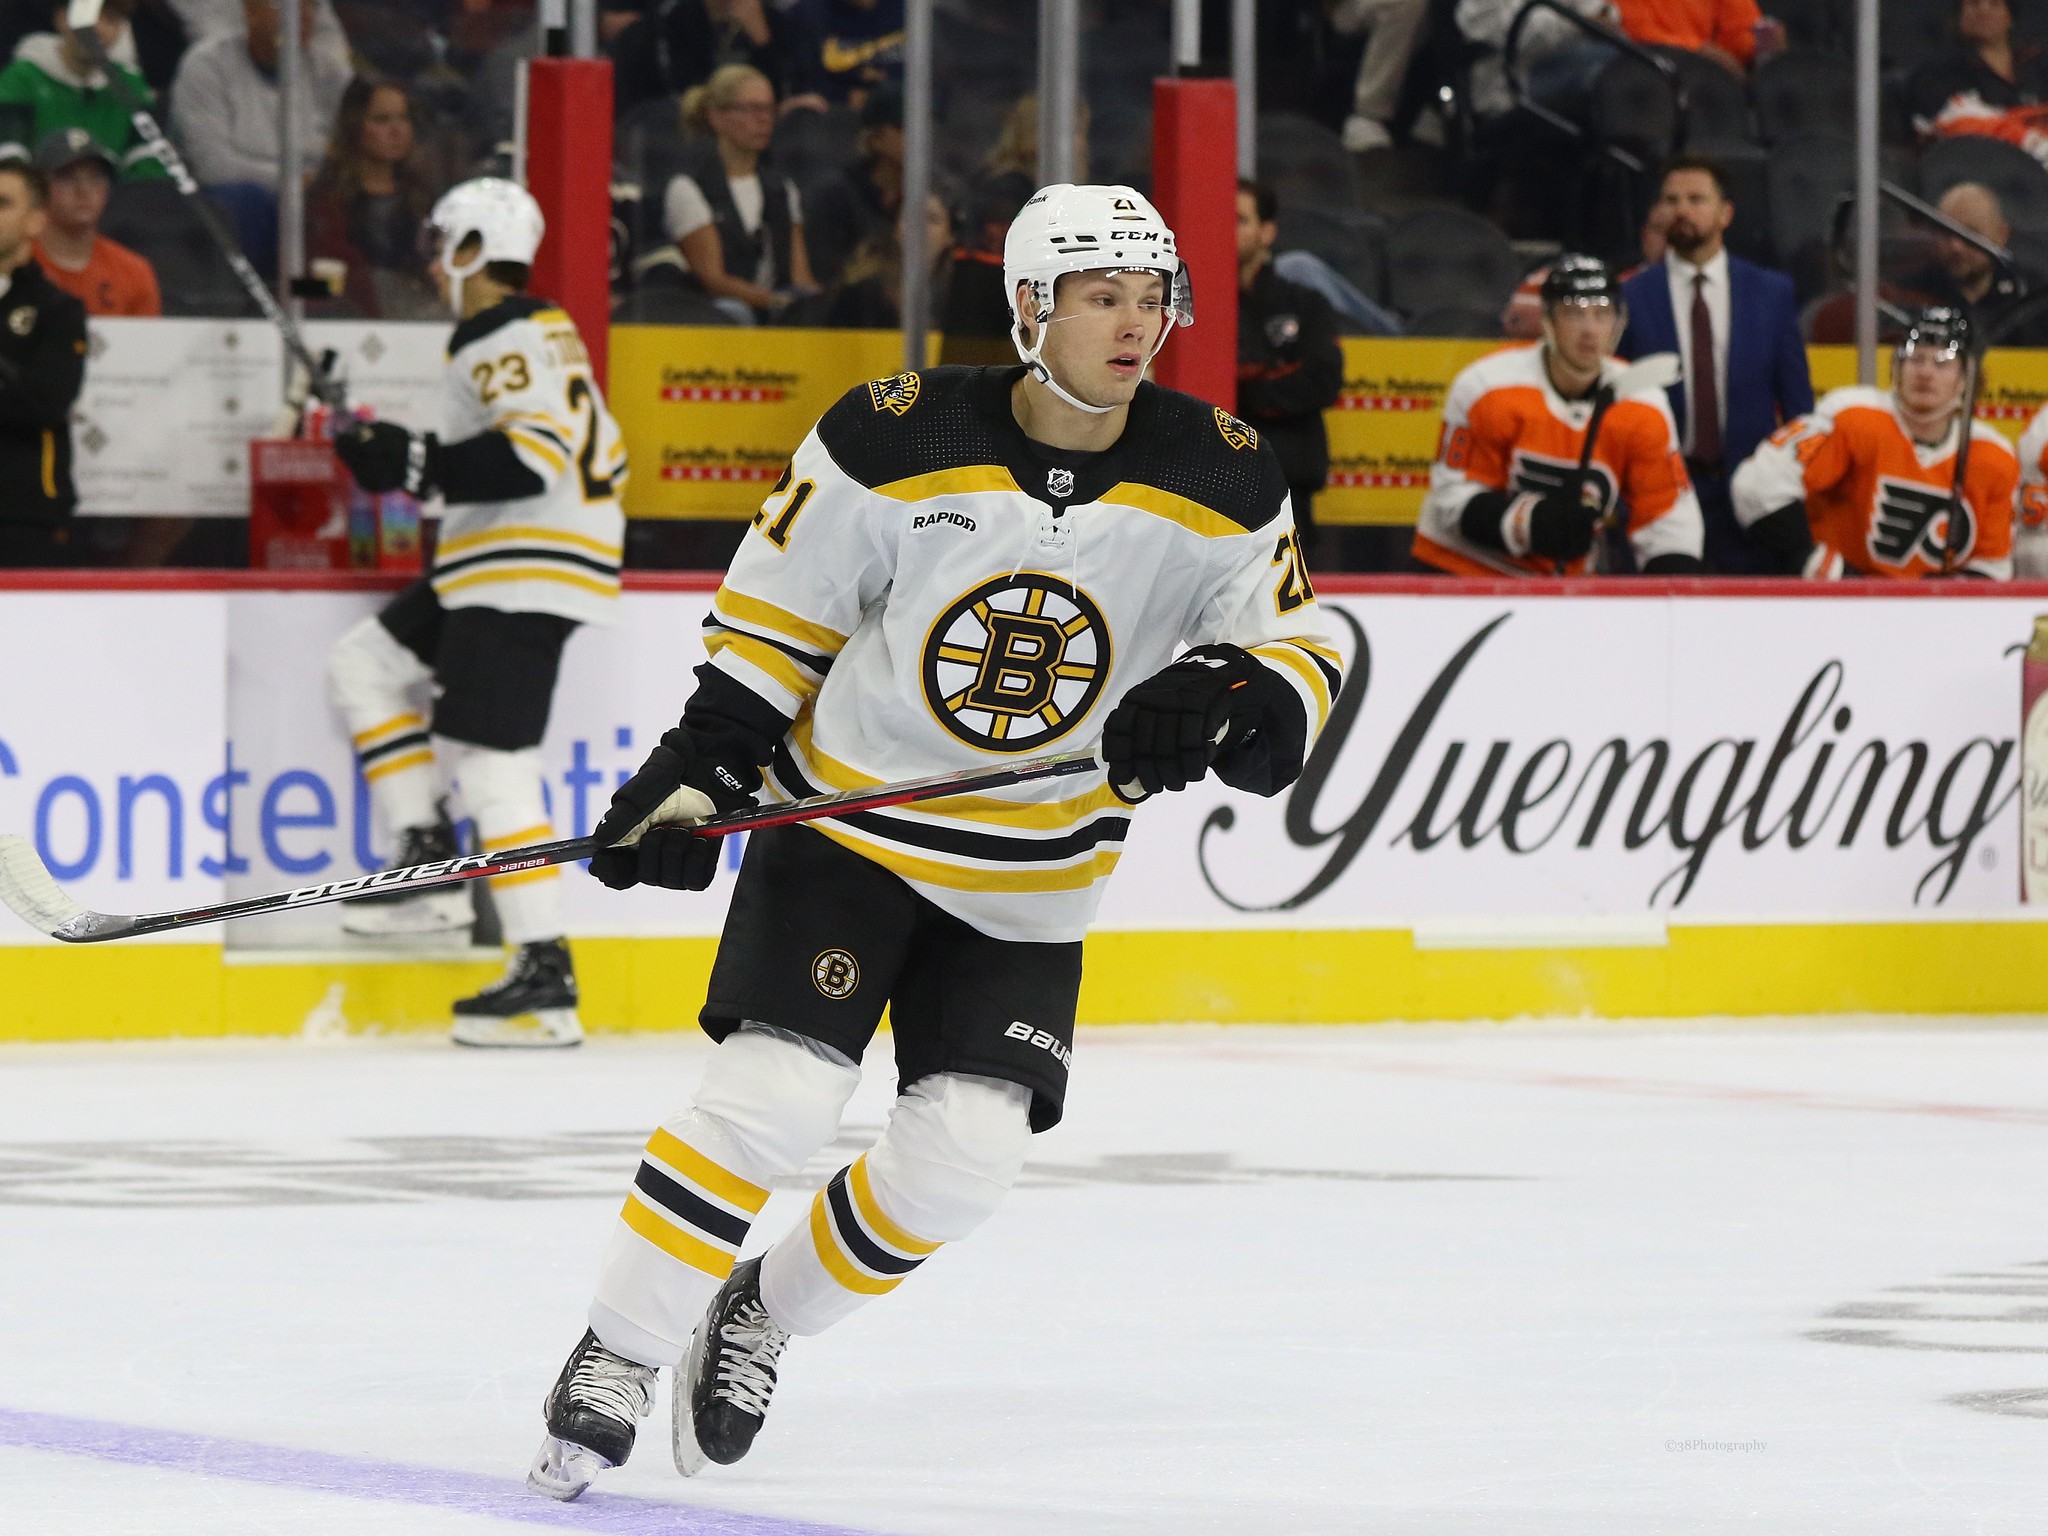 P-BRUINS TOP BEARS 4-3 IN THRILLING END TO 2022